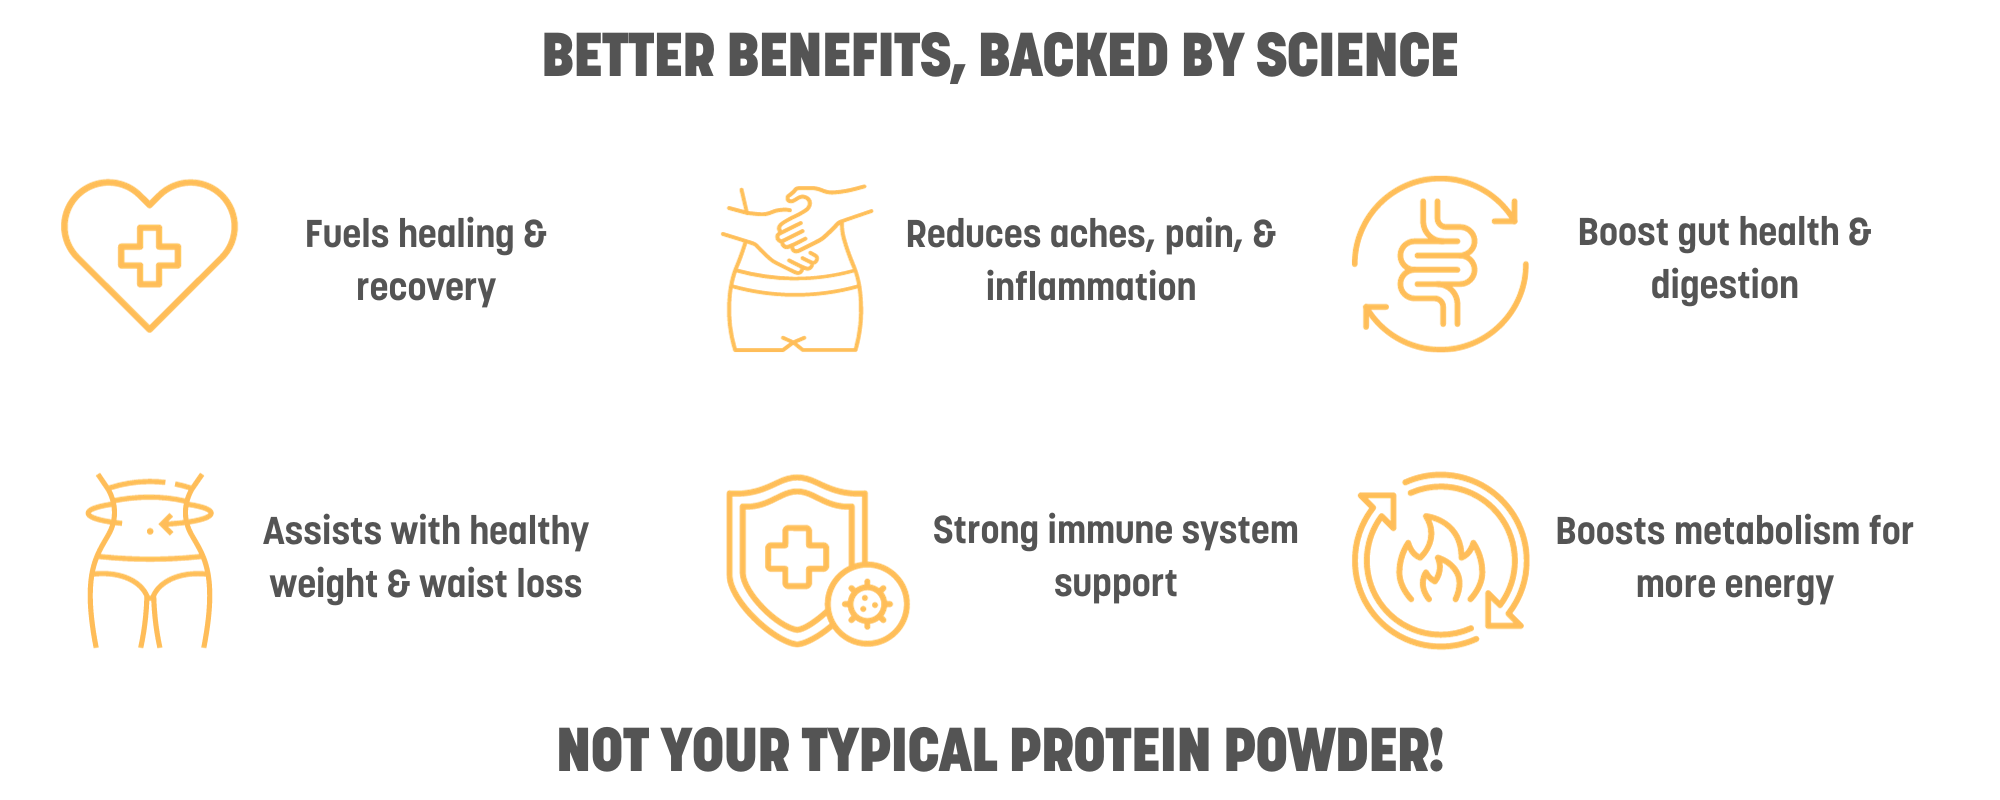 Better Benefits Backed by Science